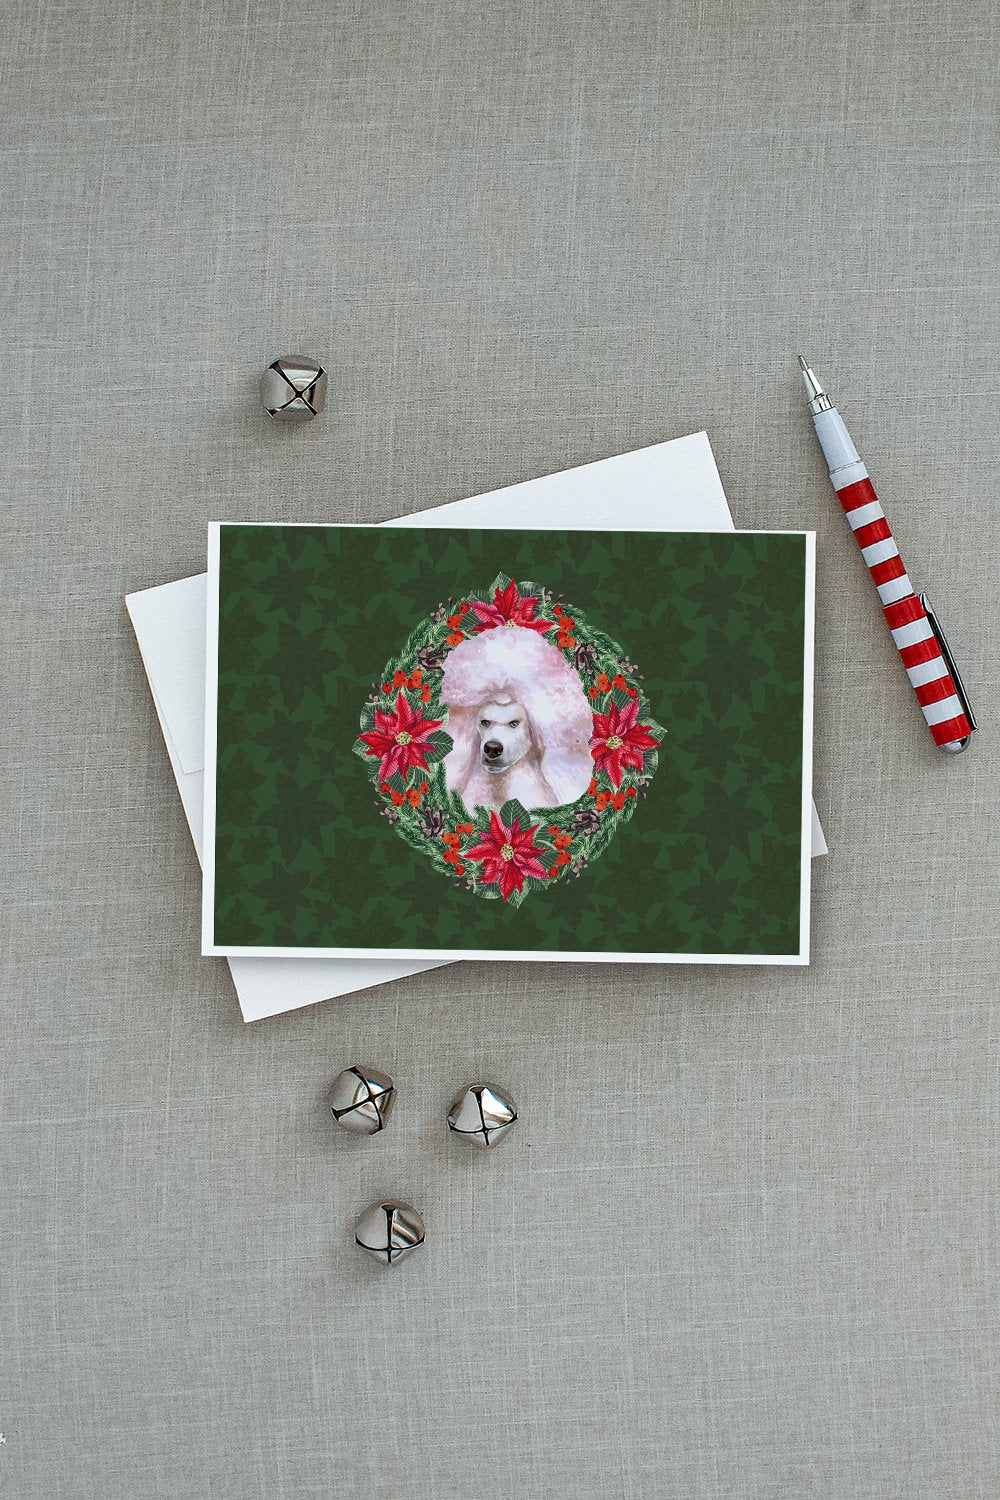 White Standard Poodle Poinsetta Wreath Greeting Cards and Envelopes Pack of 8 - the-store.com